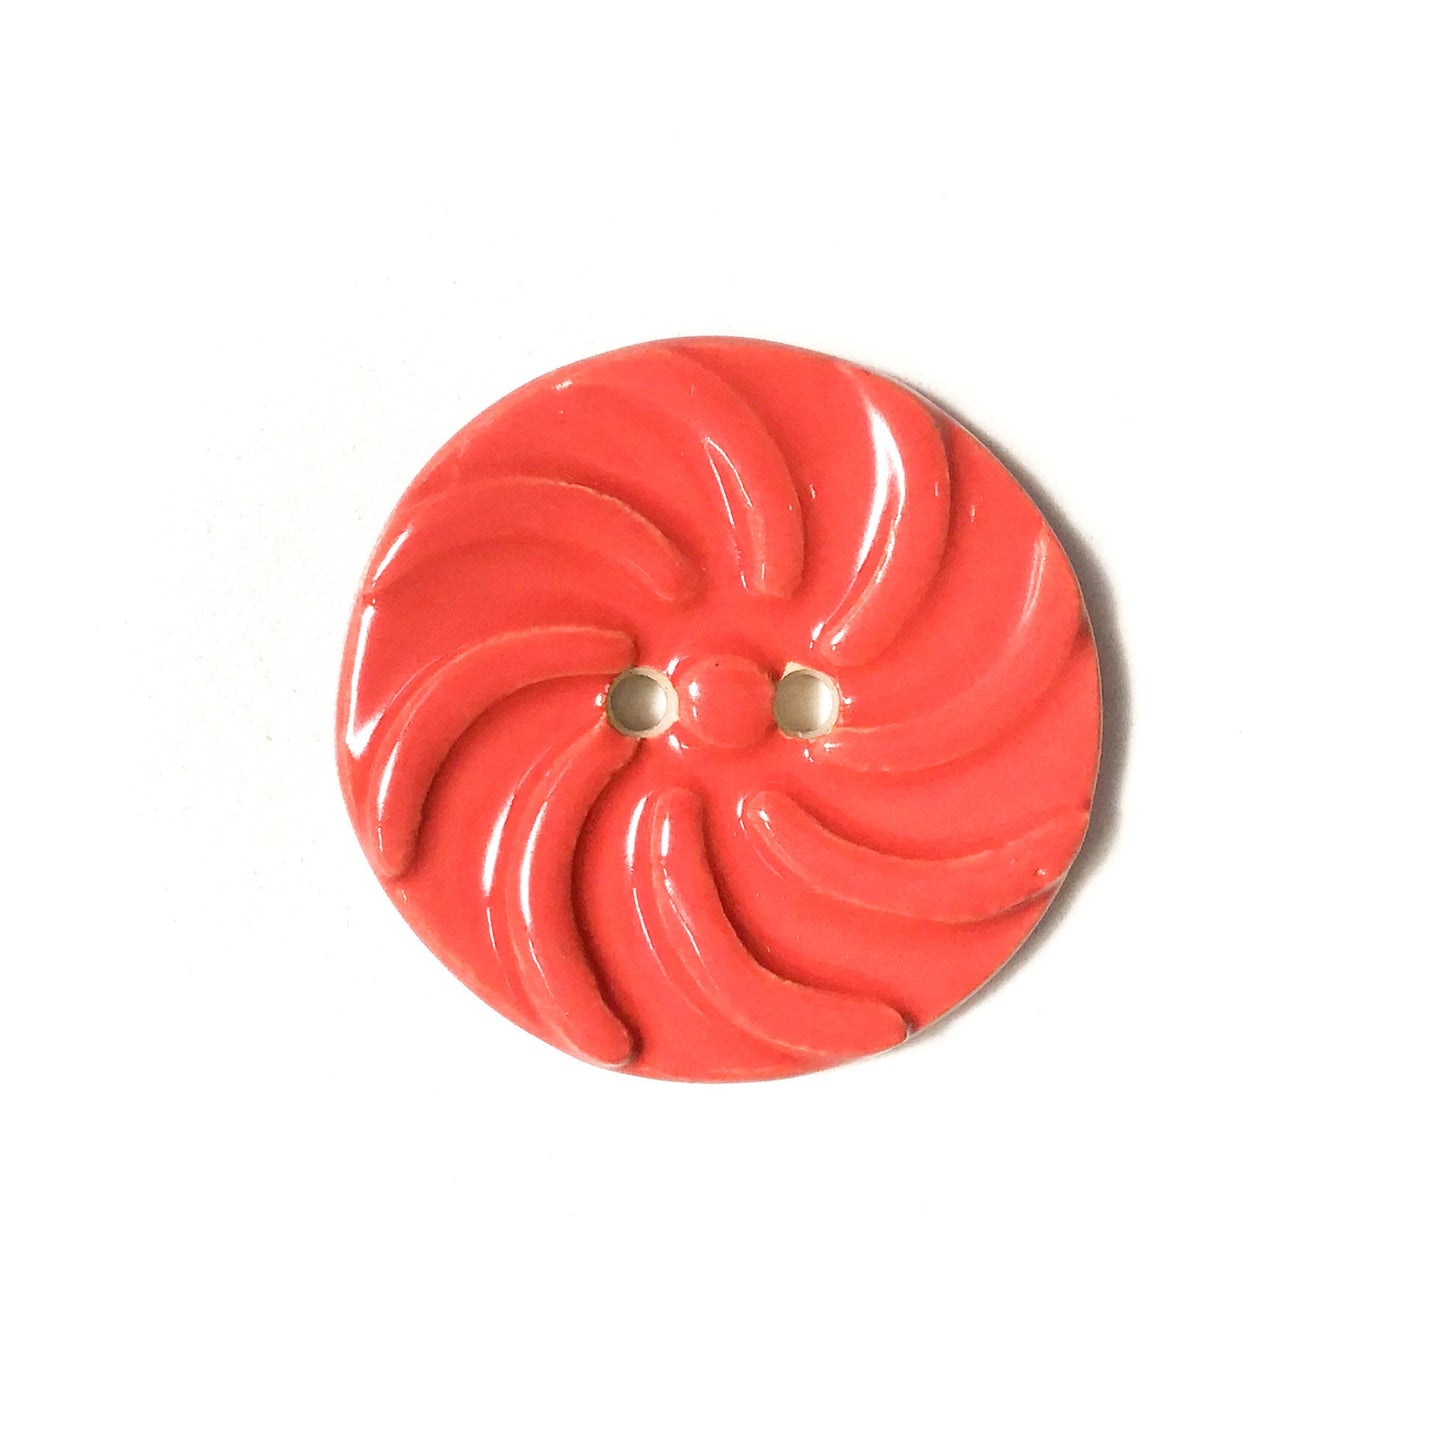 Mirro Stamp Buttons - Cheery Shades Ceramic Buttons - 1 3/8"